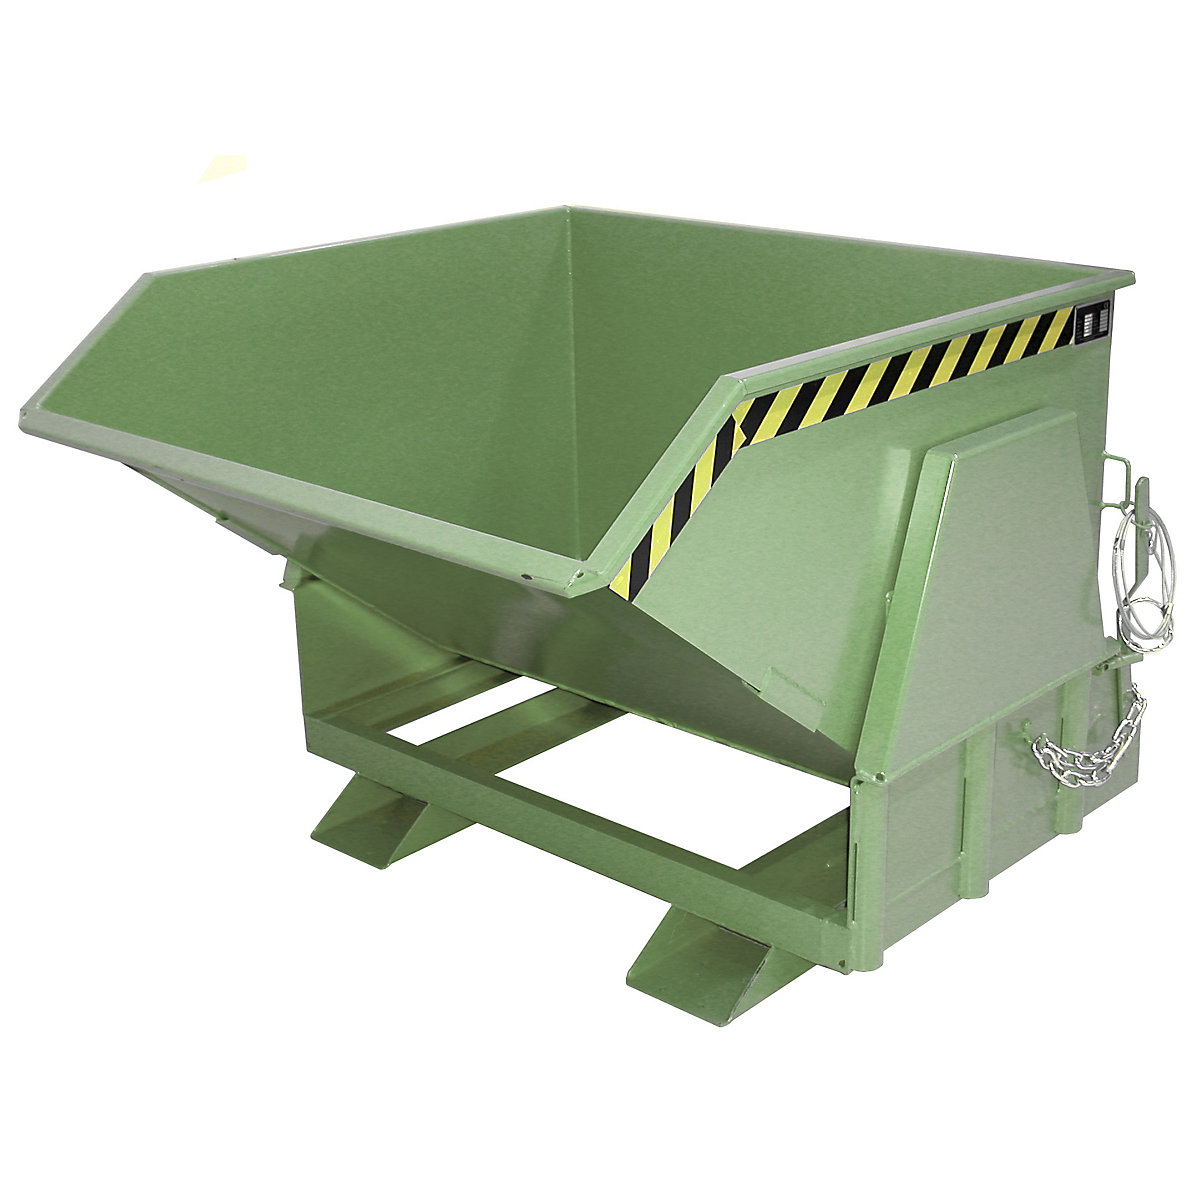 Tilting skip, standard overall height, without wheels – eurokraft pro, capacity 1.0 m³, painted green RAL 6011-11